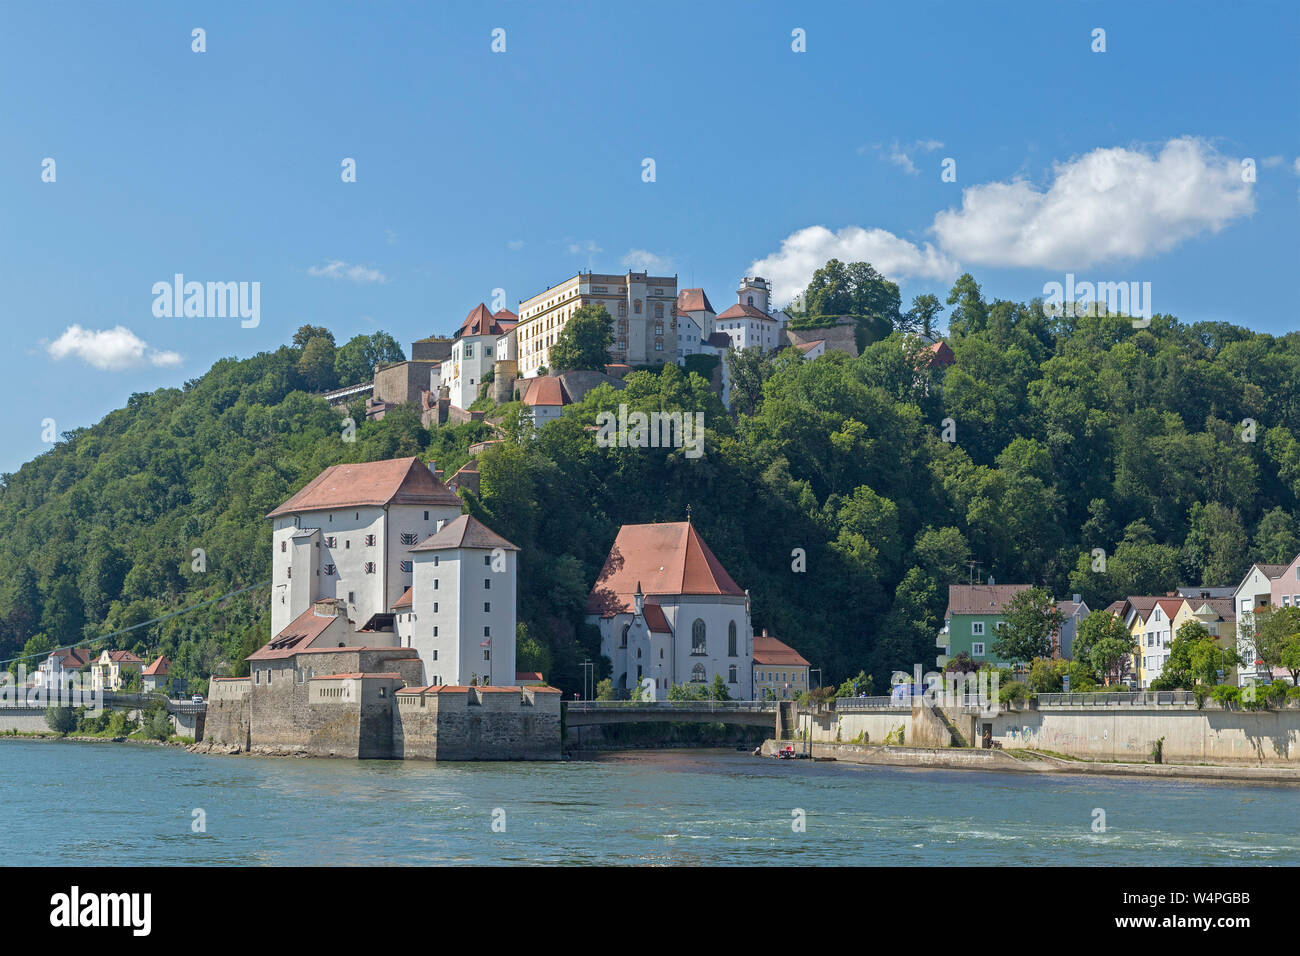 Veste Niederhaus (Lower Fortress) and Veste Oberhaus (upper fortress) at  the junction of Ilz and Danube, Passau, Lower Bavaria, Bavaria, Germany  Stock Photo - Alamy